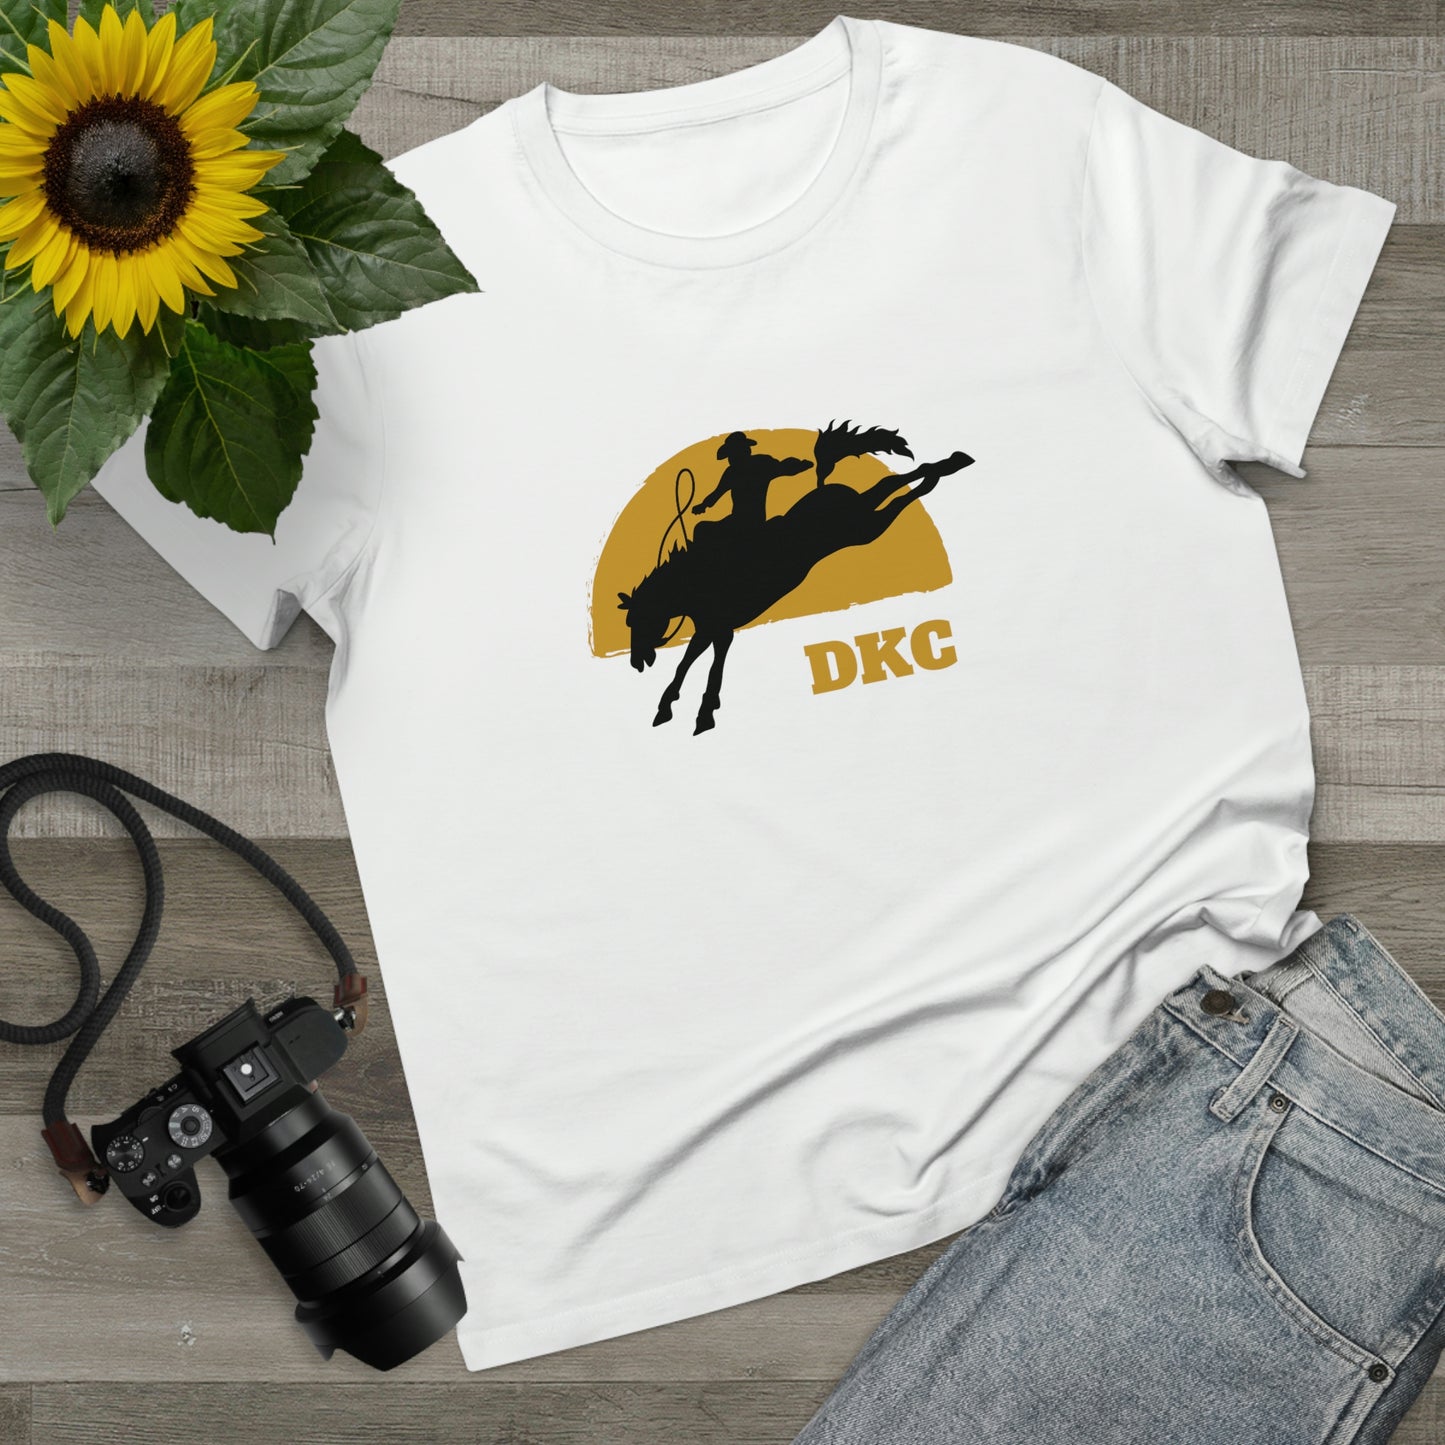 Load image into Gallery viewer, Women’s DKC horse Jump crew neck t-shirt
